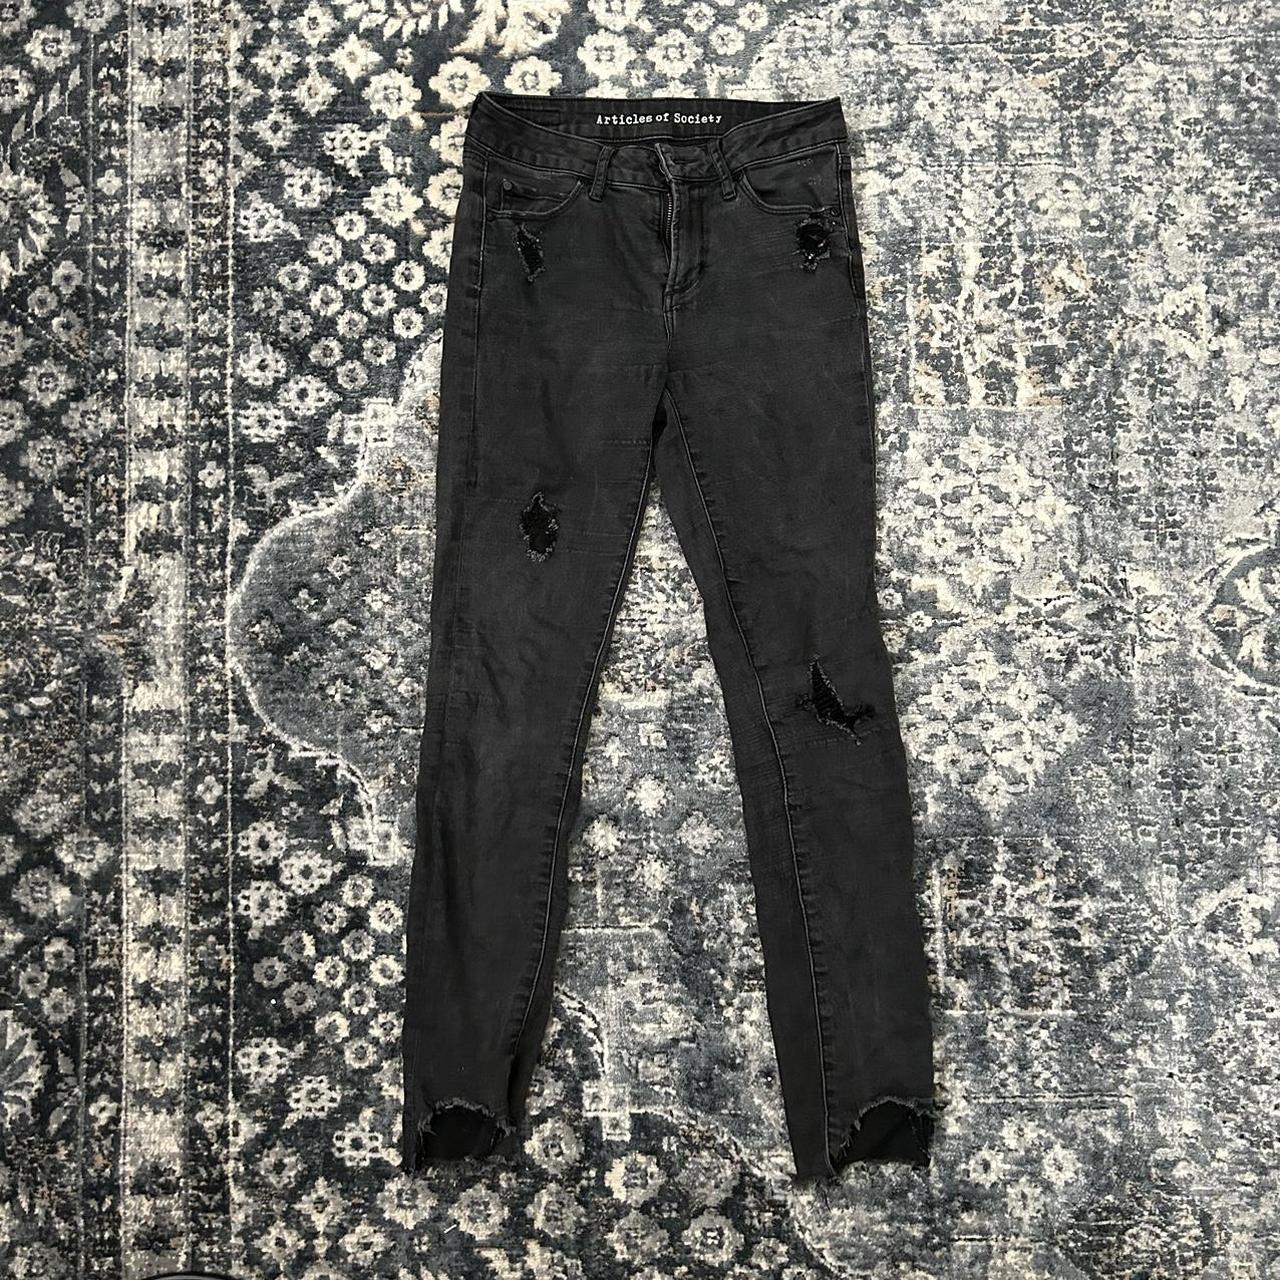 Articles of Society Women's Black and Grey Jeans (2)